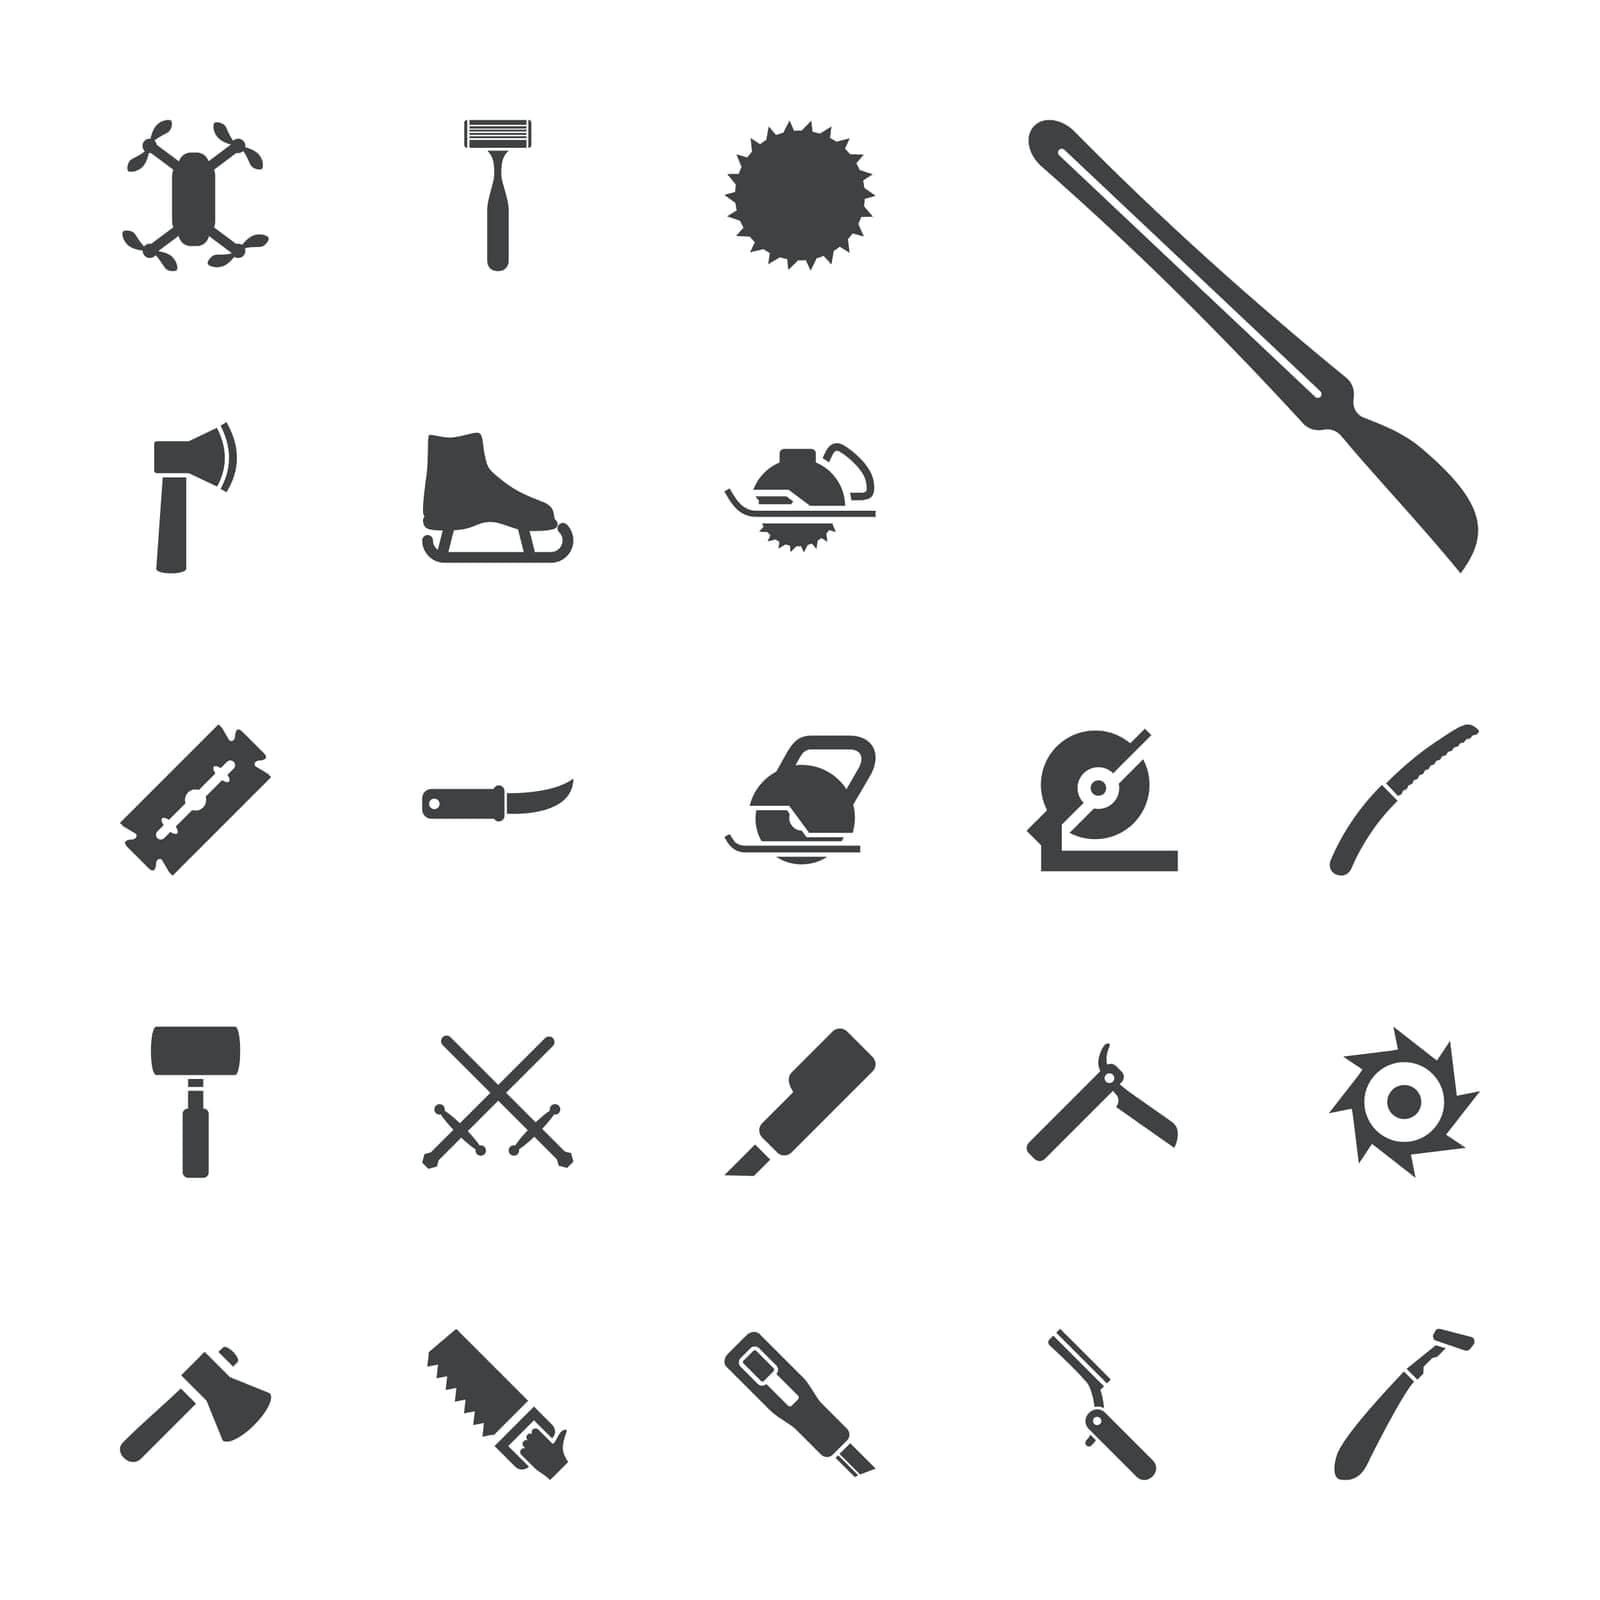 symbol,steel,cut,gardening,icon,sign,isolated,cutter,ice,blade,axe,white,flat,design,scalpel,vector,axle,graphic,element,bllade,set,propeller,electric,saw,equipment,circular,handle,tool,sharp,sword,with,knife,background,razor,illustration,skate,object,care by ogqcorp